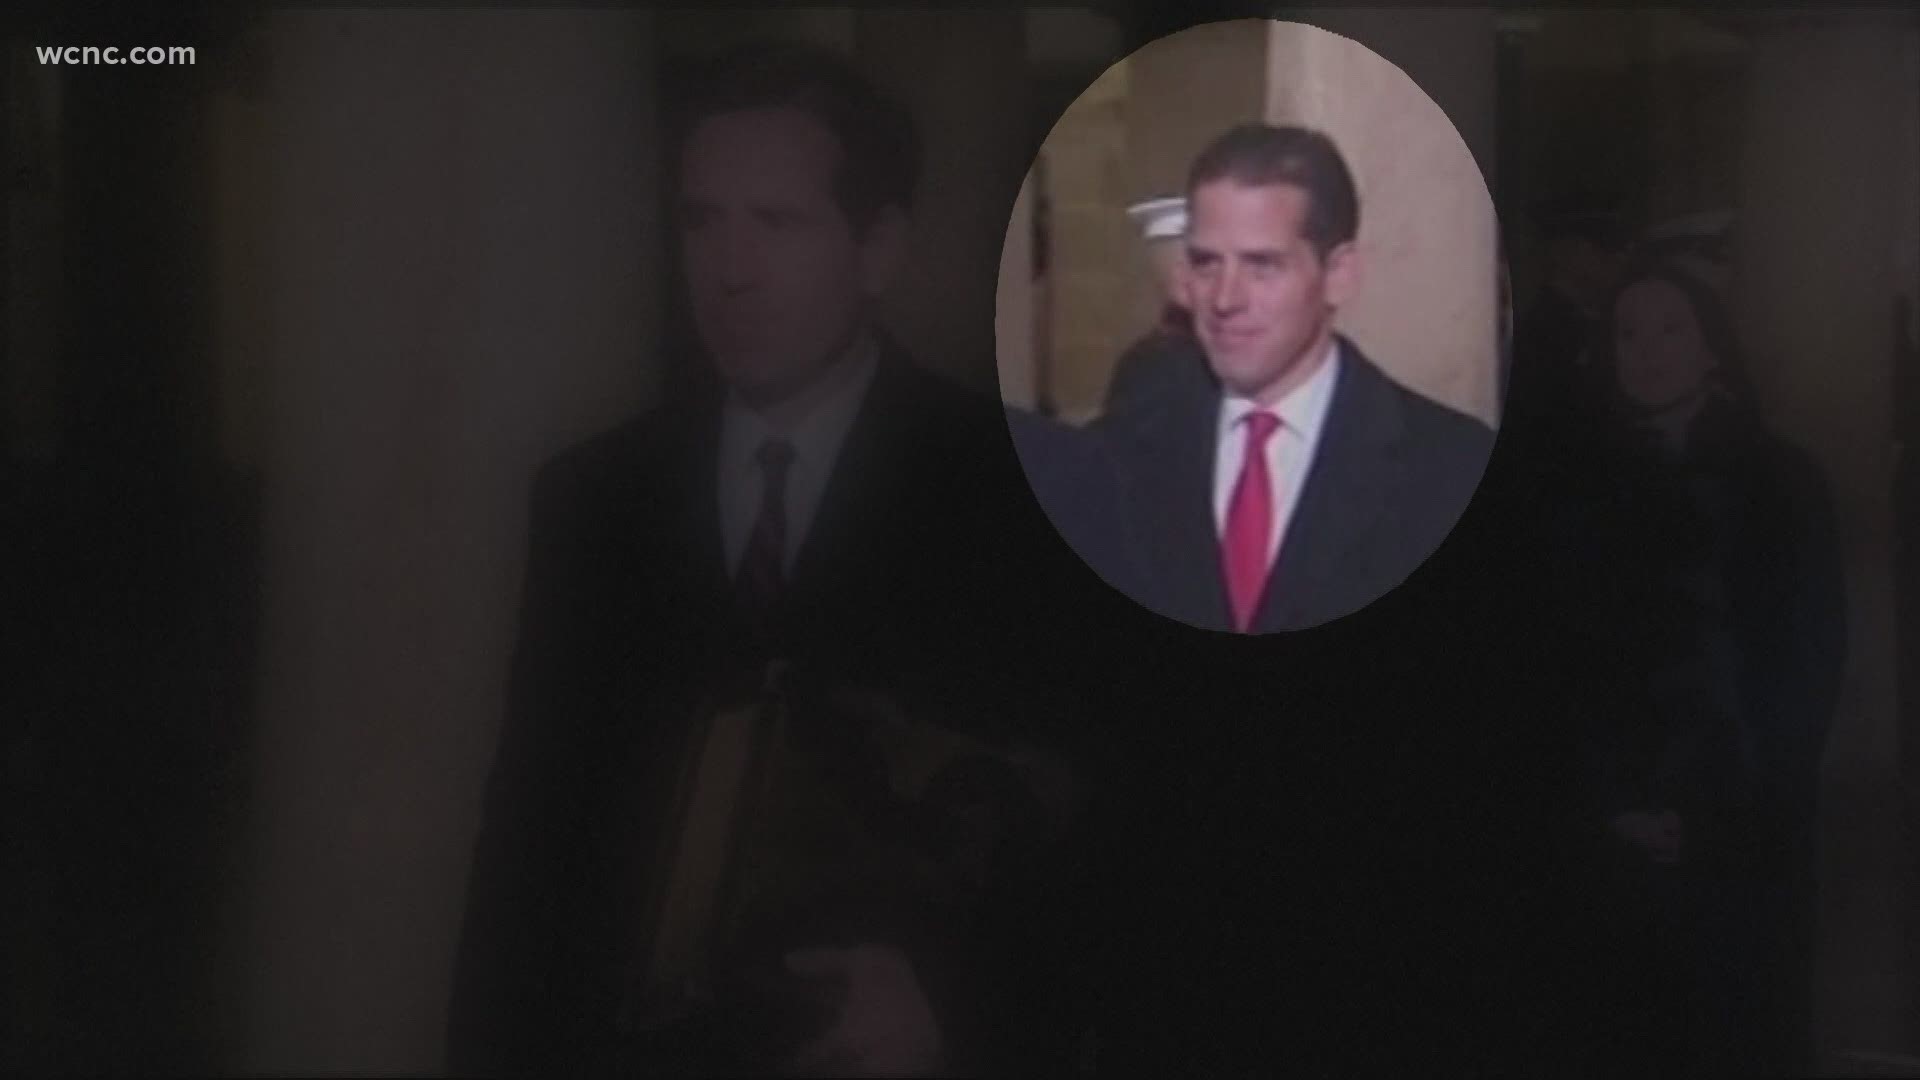 Joe Biden's son is now under federal investigation for tax affairs.